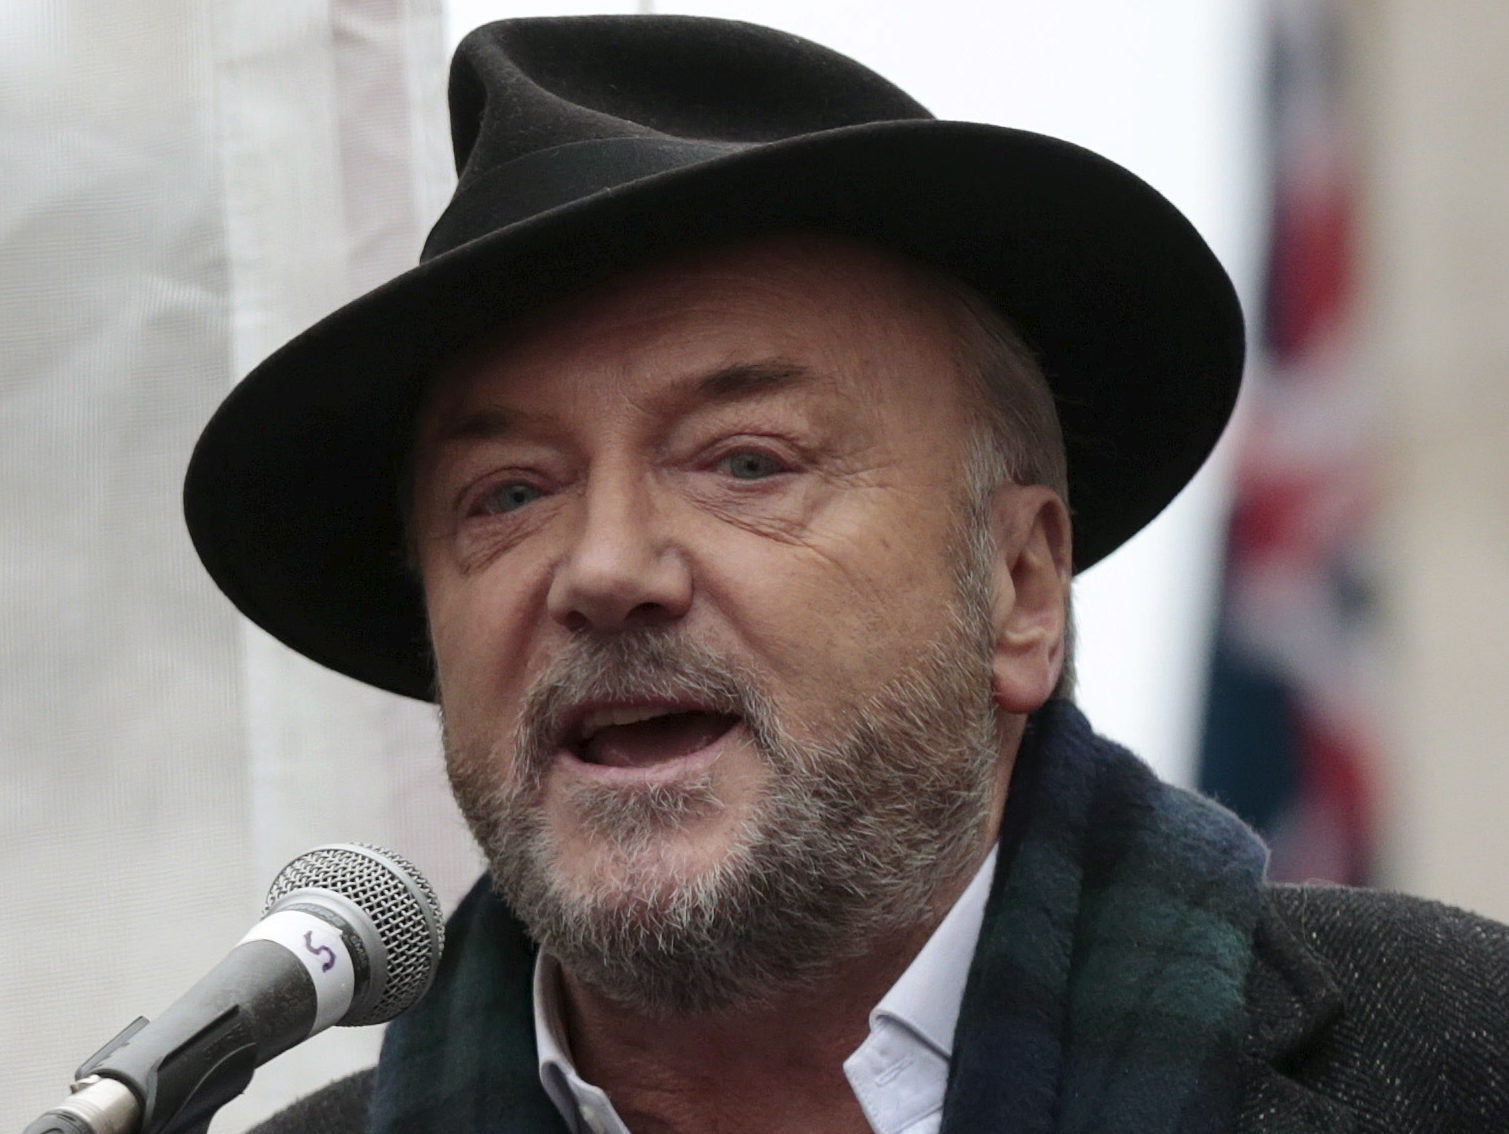 Talkradio admits George Galloway shows 'crossed the line' as Ofcom threatens sanctions over impartiality breach